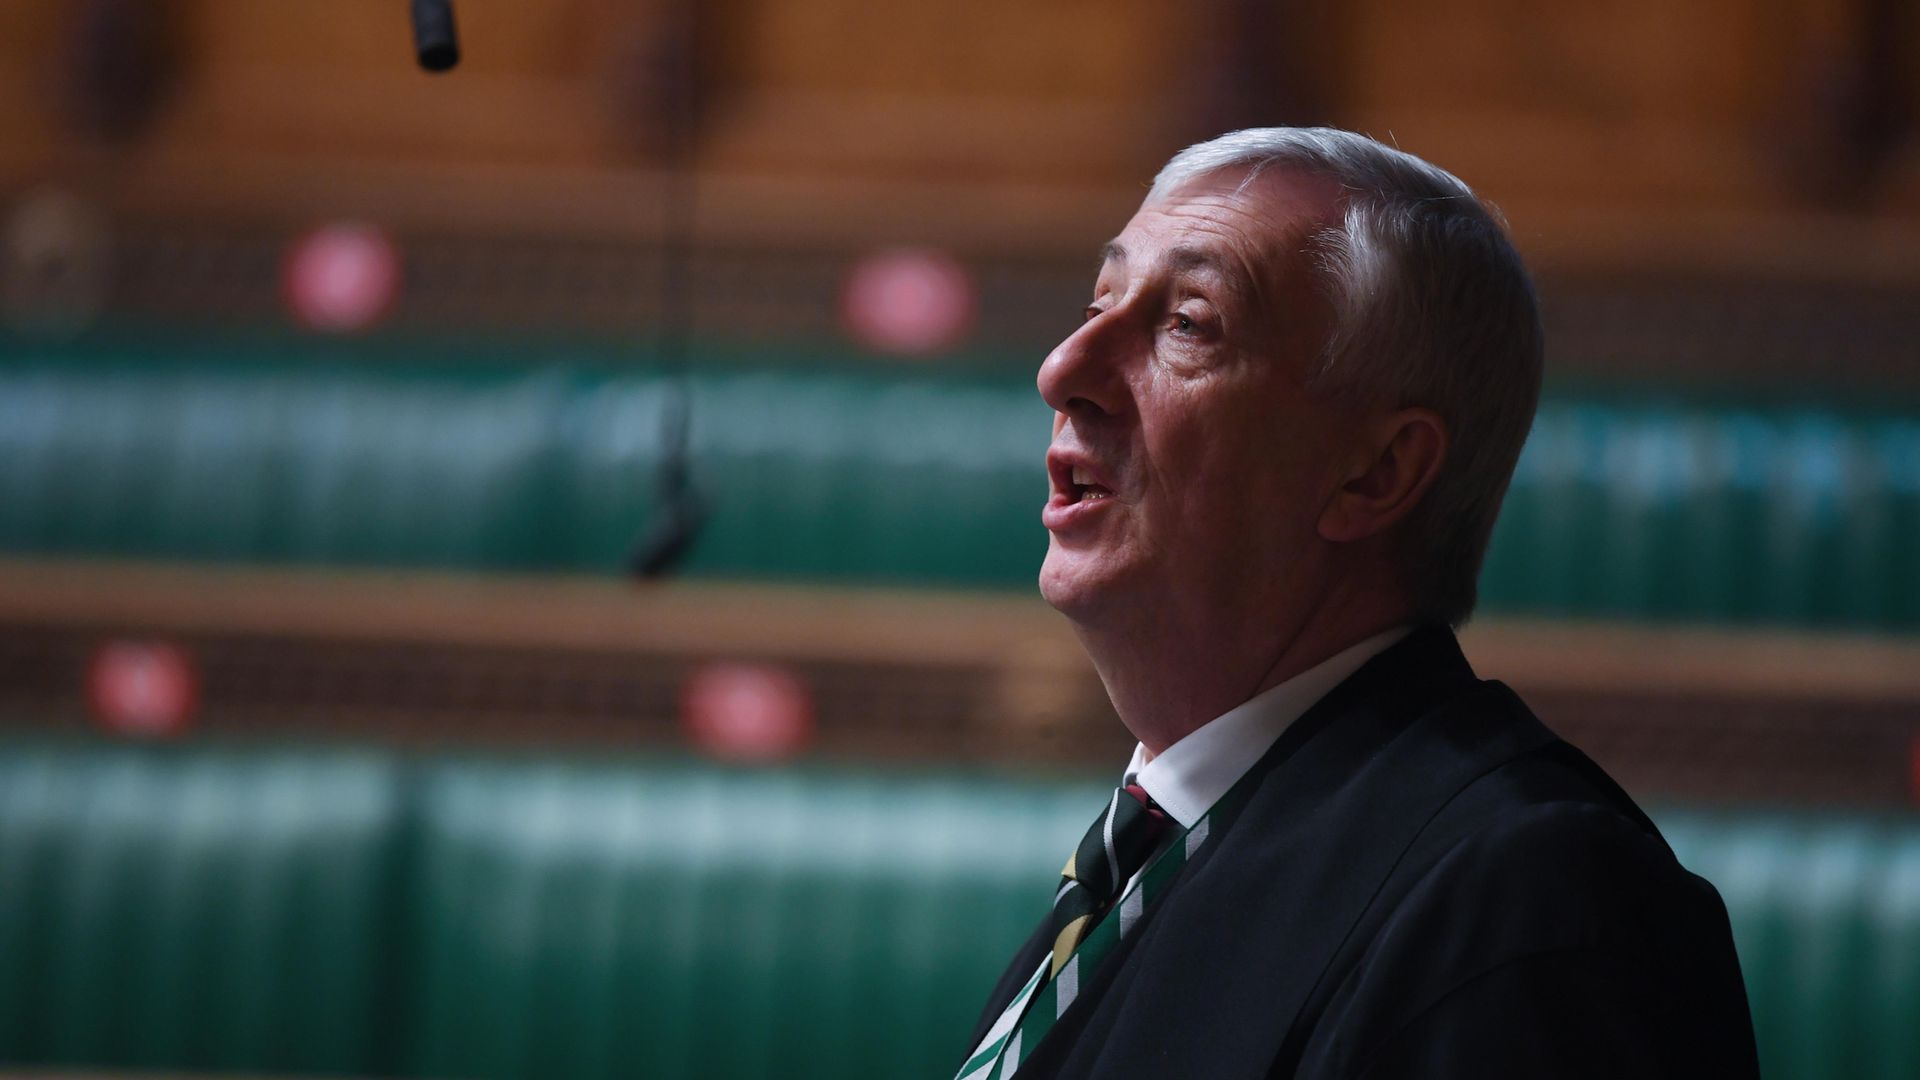 Sir Lindsay Hoyle in the House of Commons - Credit: Jessica Taylor